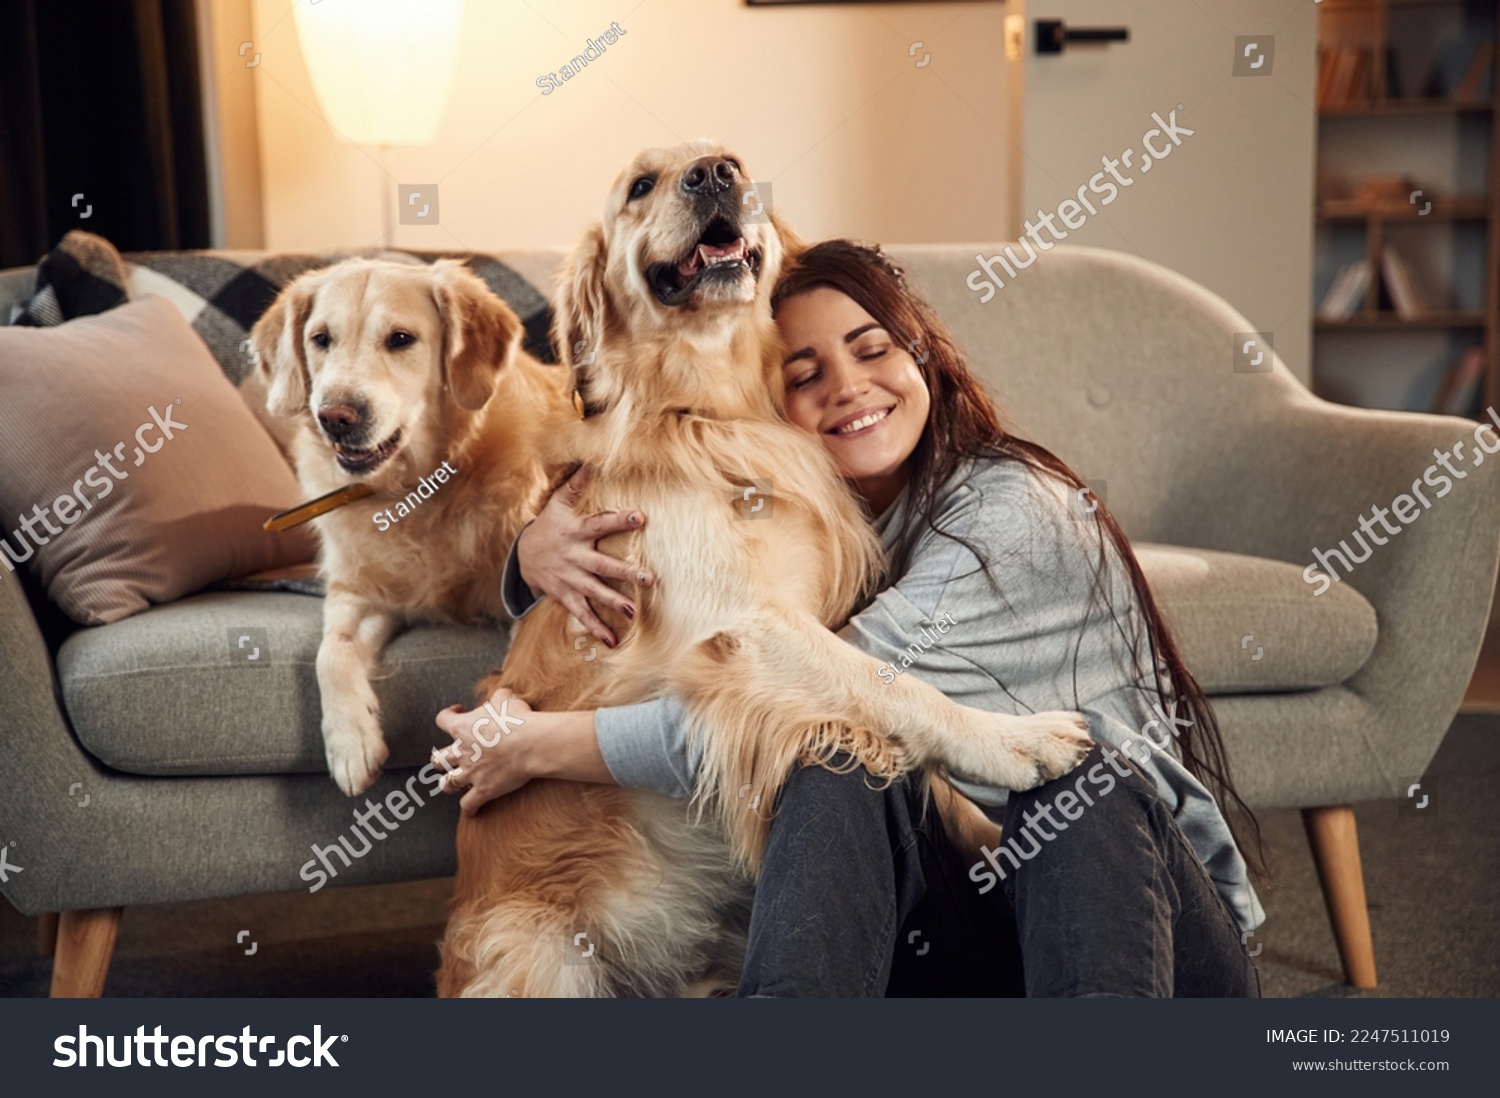 Friendly animals. Woman is with two golden retriever dogs at home. #2247511019